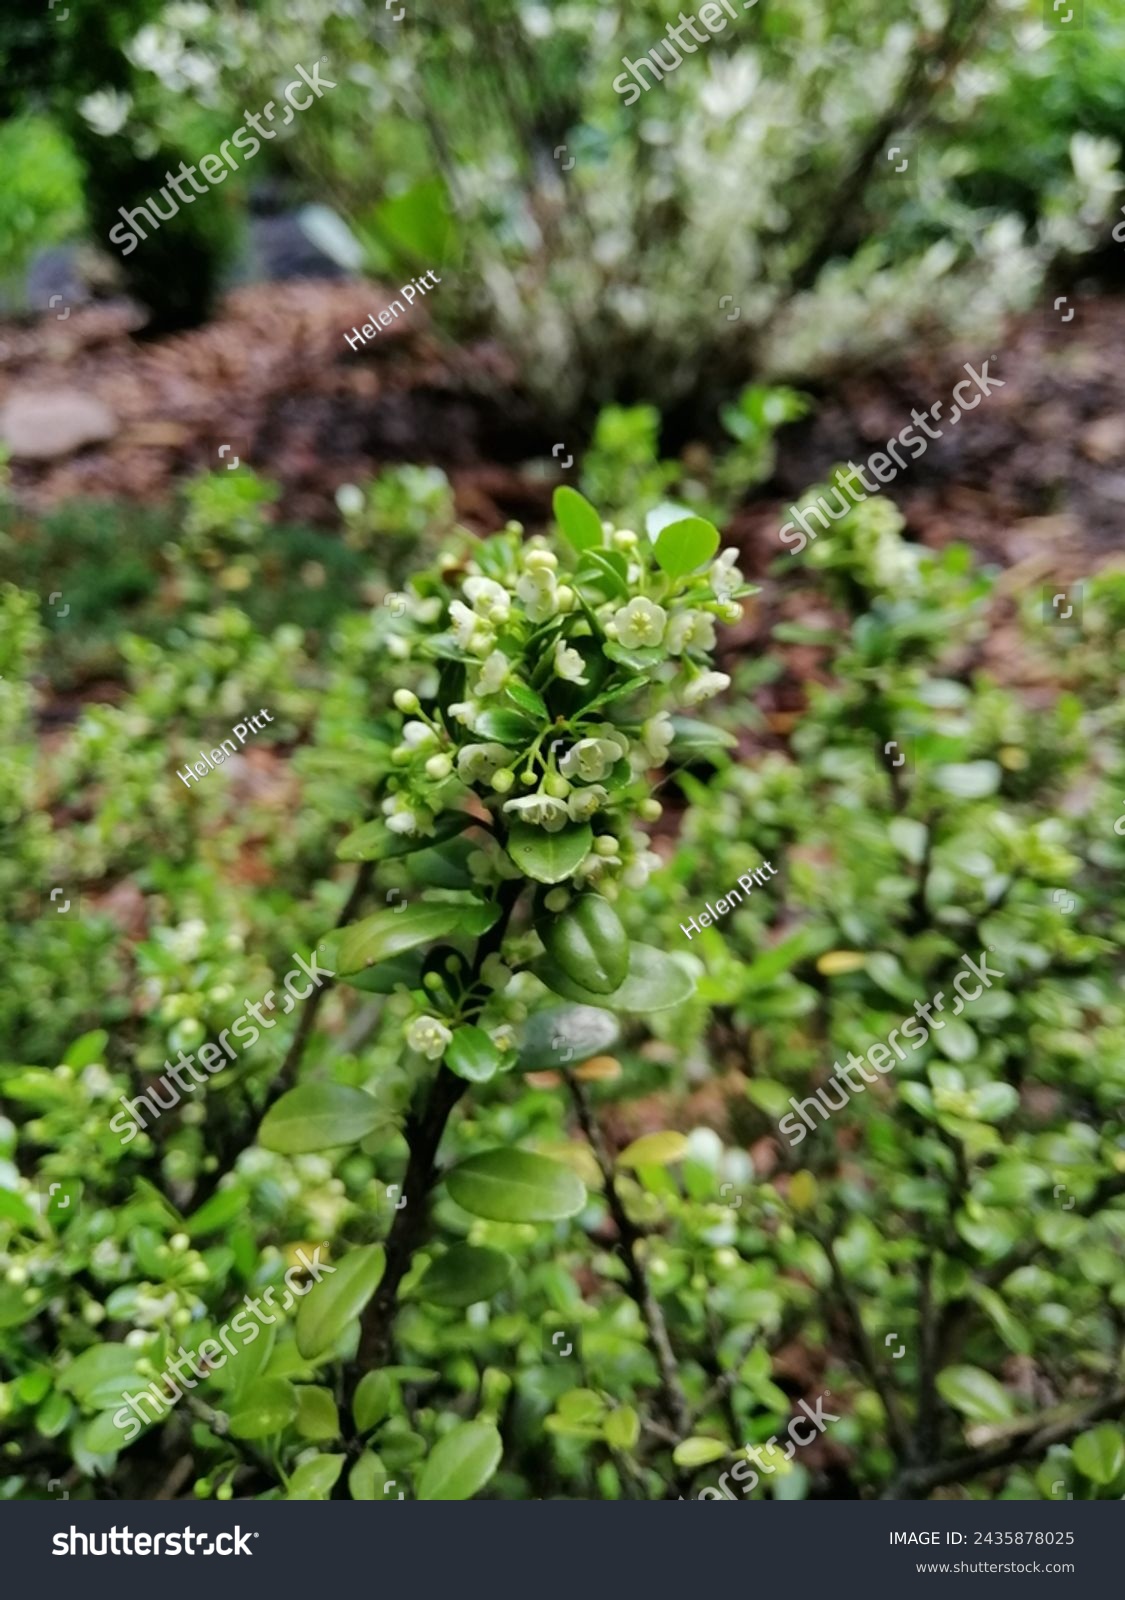 Blooming Evergreen round spherical Ilex crenata Convexa or Japanese Holly shrub with small glossy leaves and tiny white flowers on the blurred garden background  #2435878025